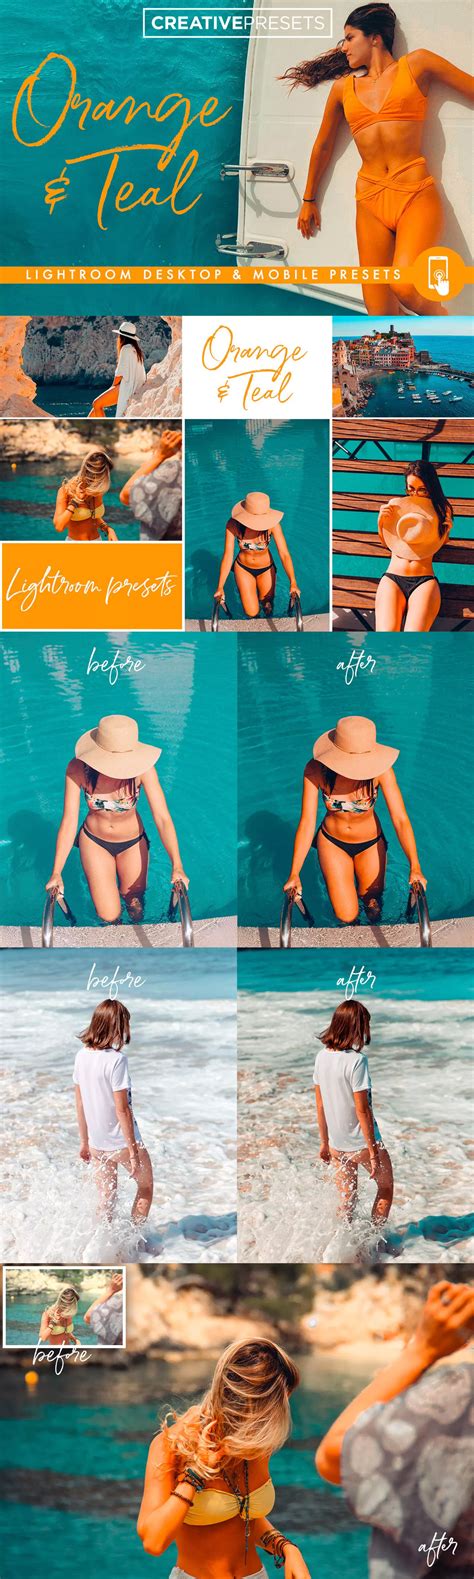 .aqua and orange preset download for editing because many of people want to edit this tutorial i really sure that you really like picsart lightroom cc aqua and orange preset download g.you can use. Orange and Teal Lightroom Presets Desktop & Mobile by 2FX ...